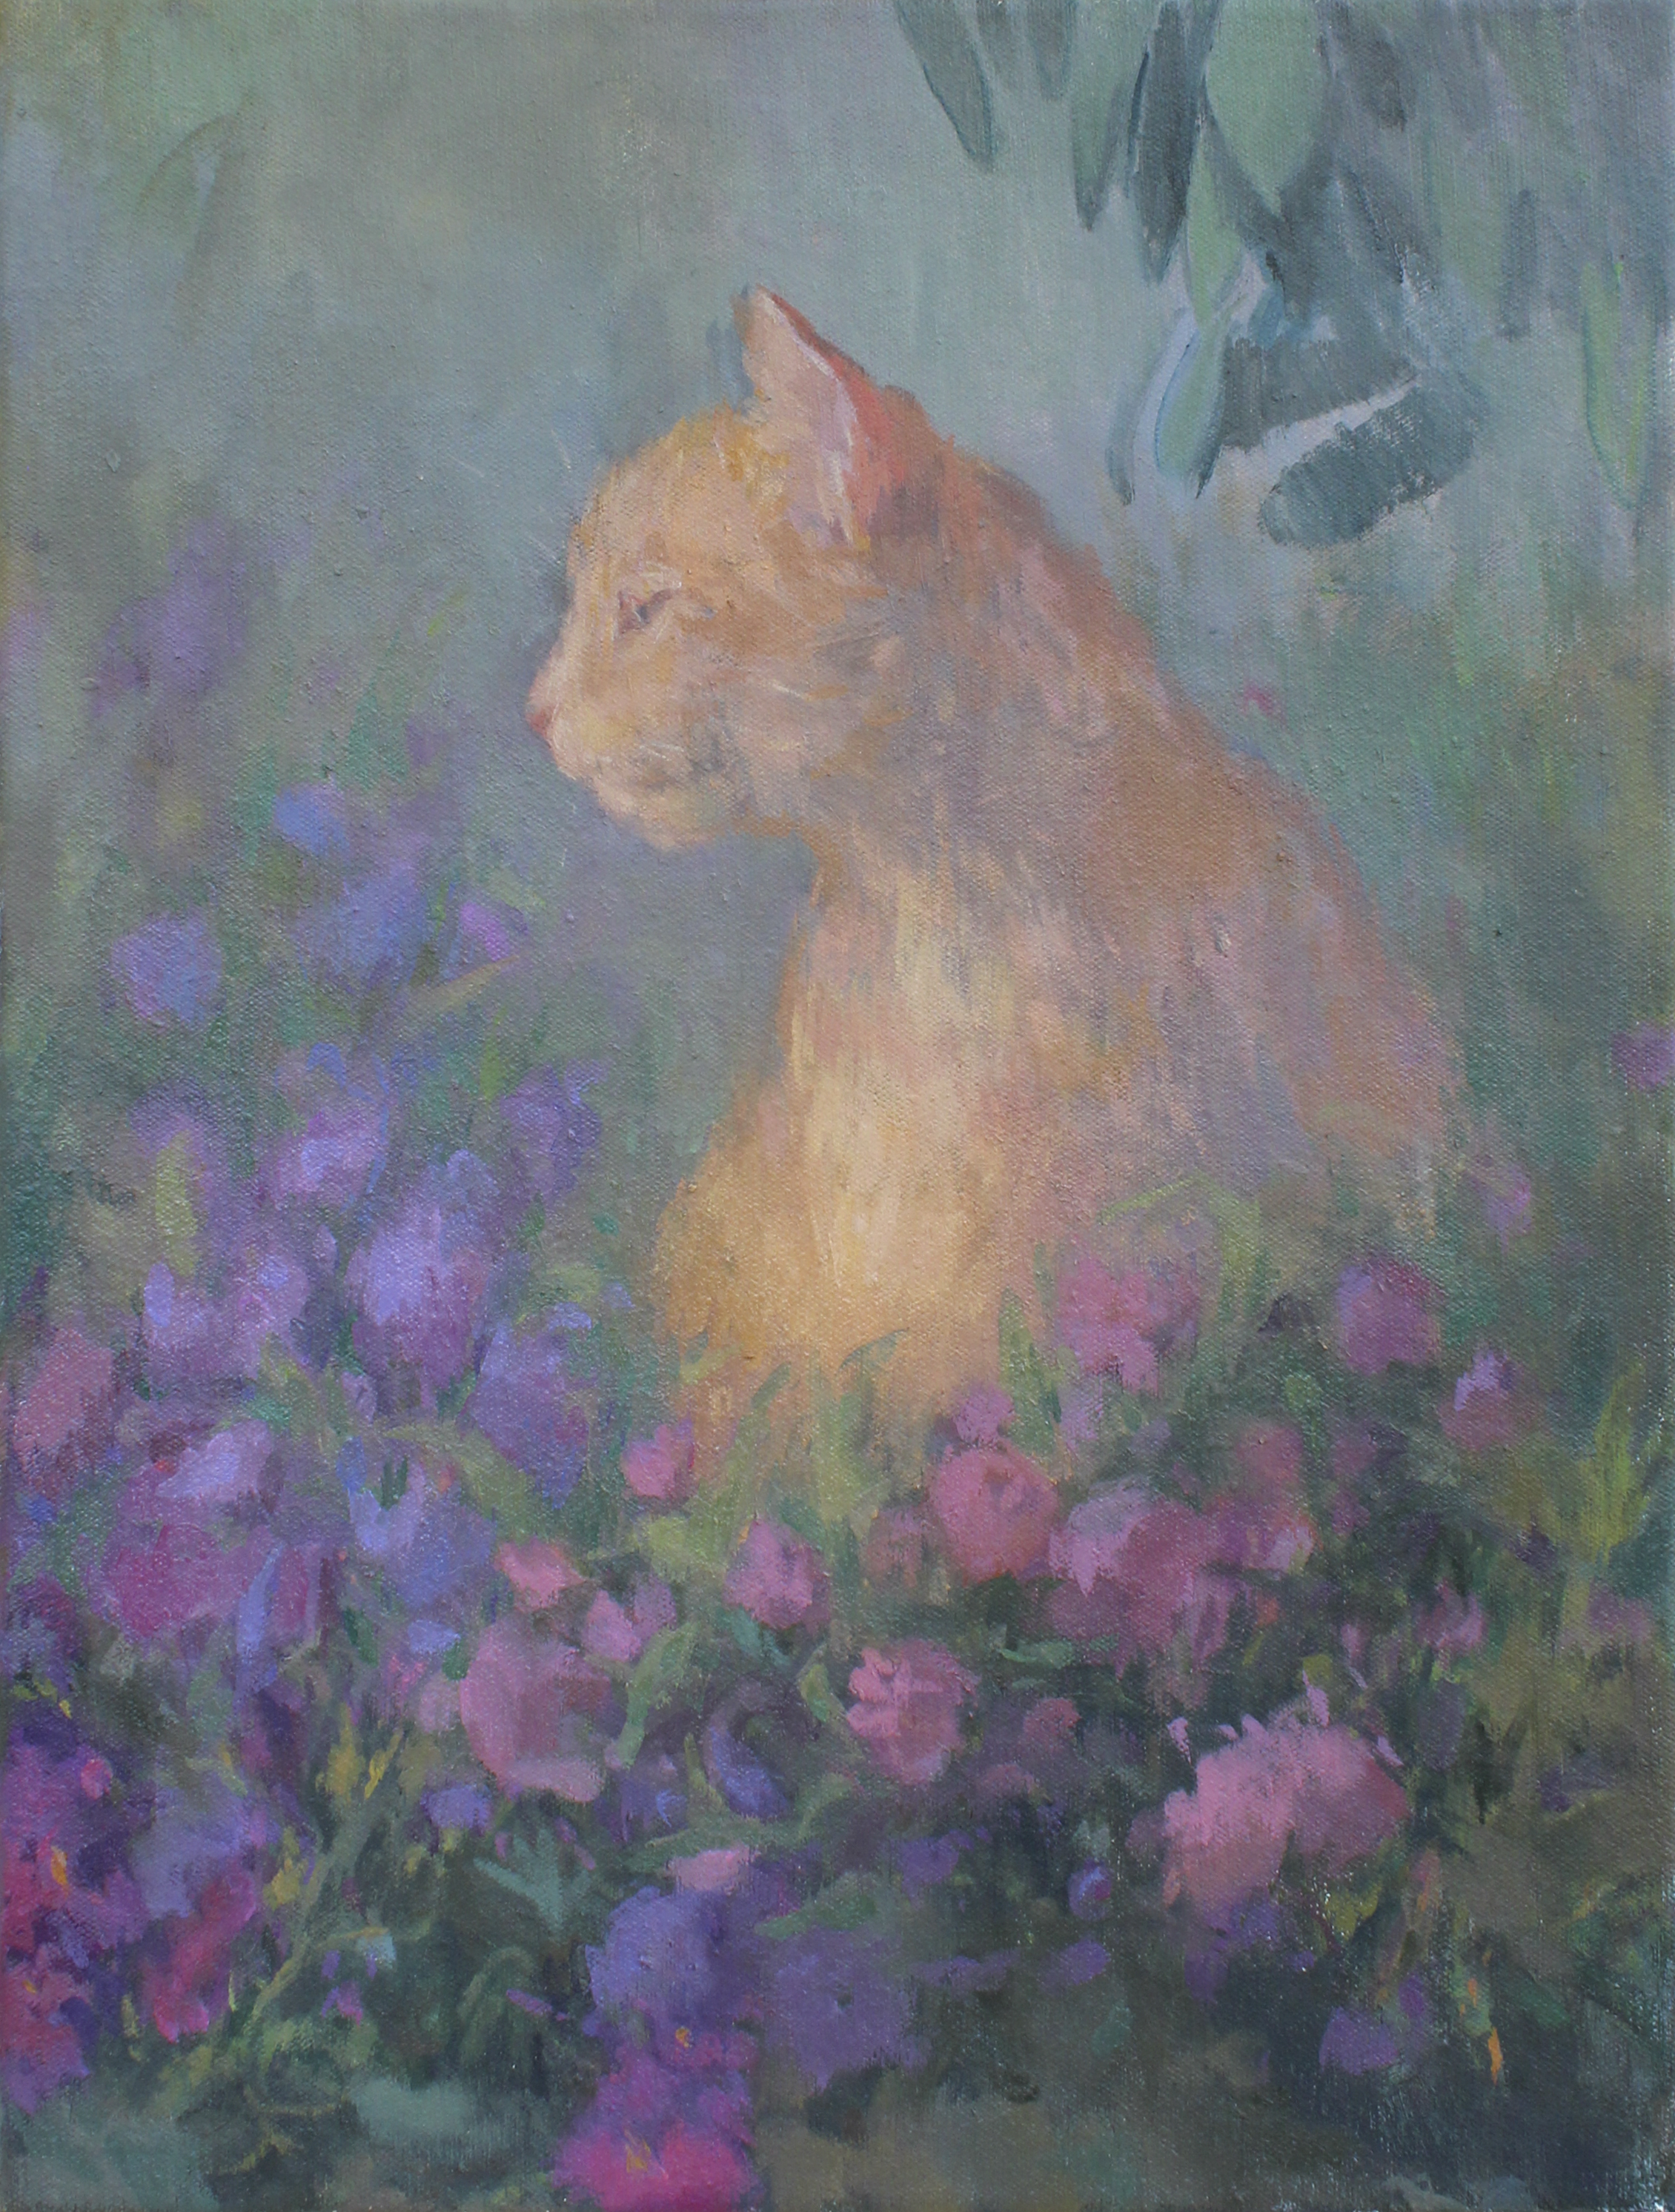    orange tabby     oil on canvas 16x20" 2016  Private collection TN  purchase prints  